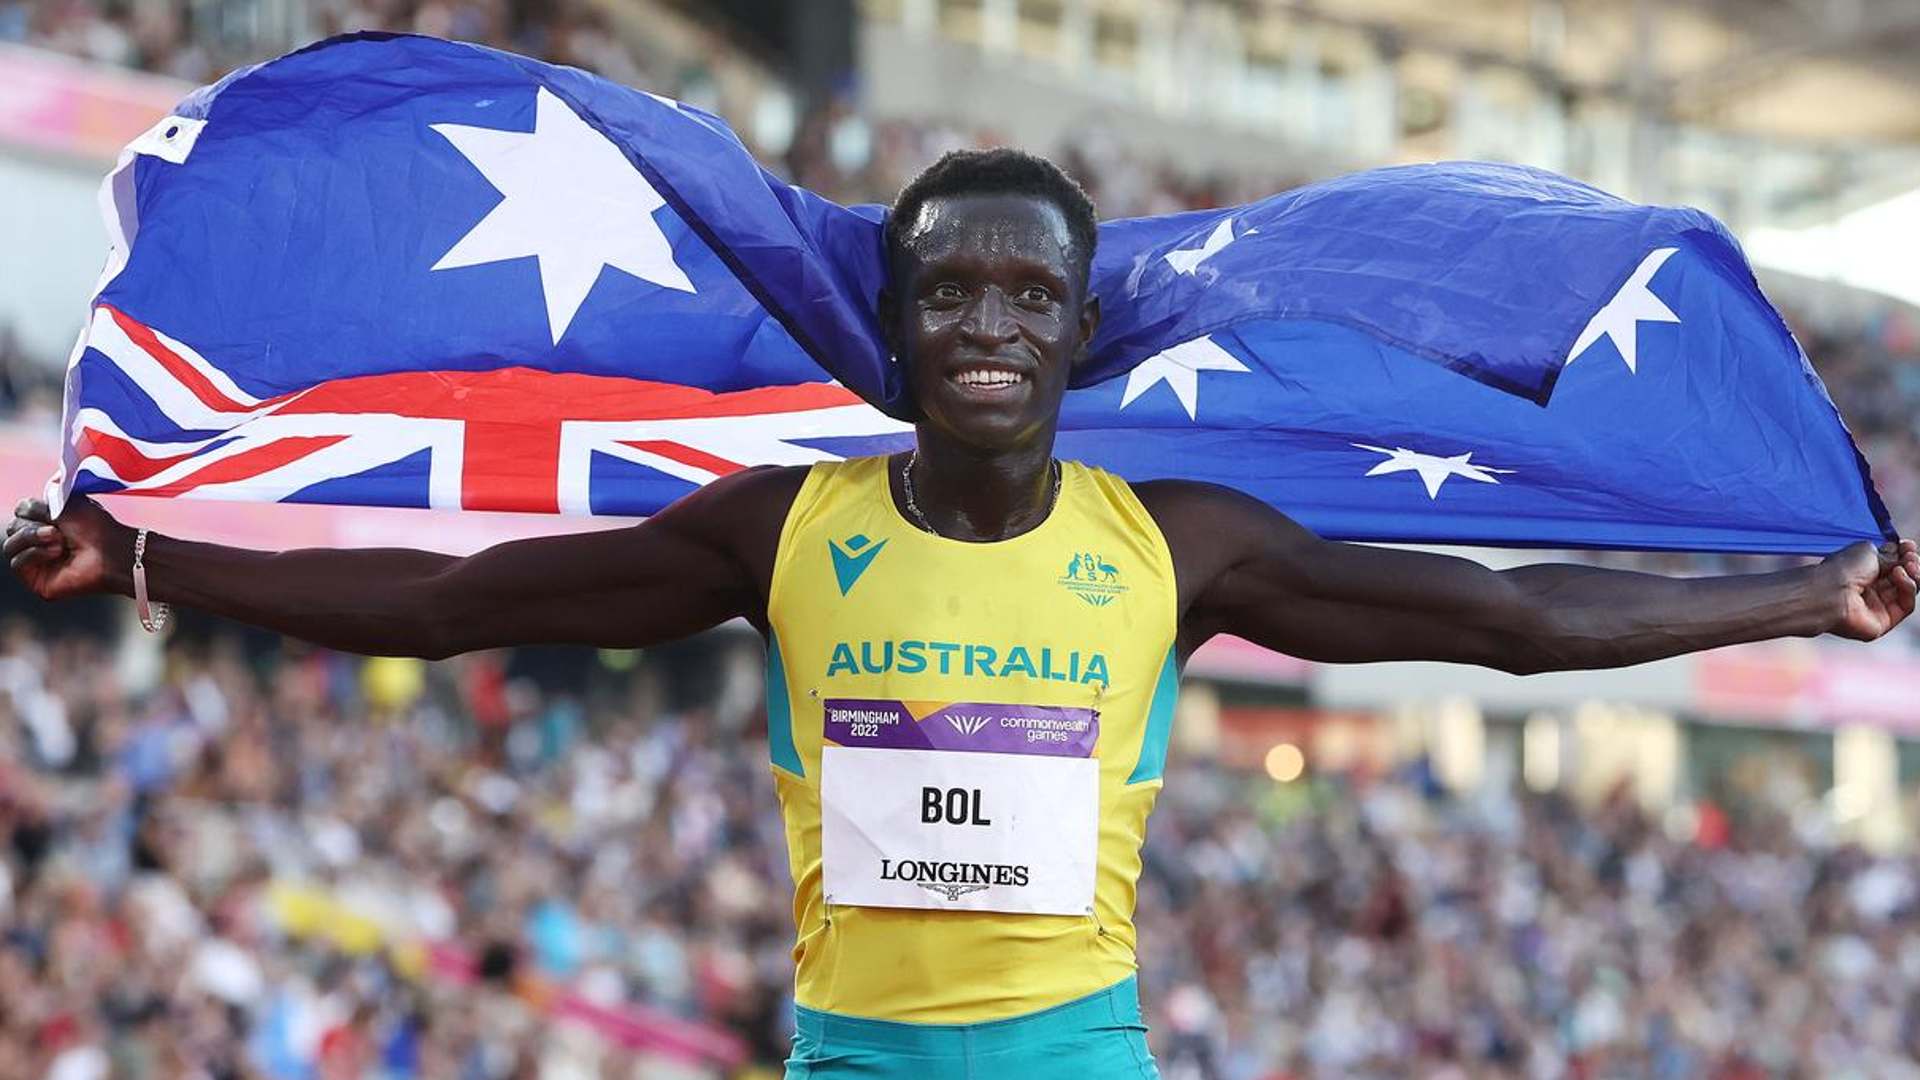 Peter Bol after winning the silver medal for Australia in Commonwealth Games 2022 (Image - World Athletics)